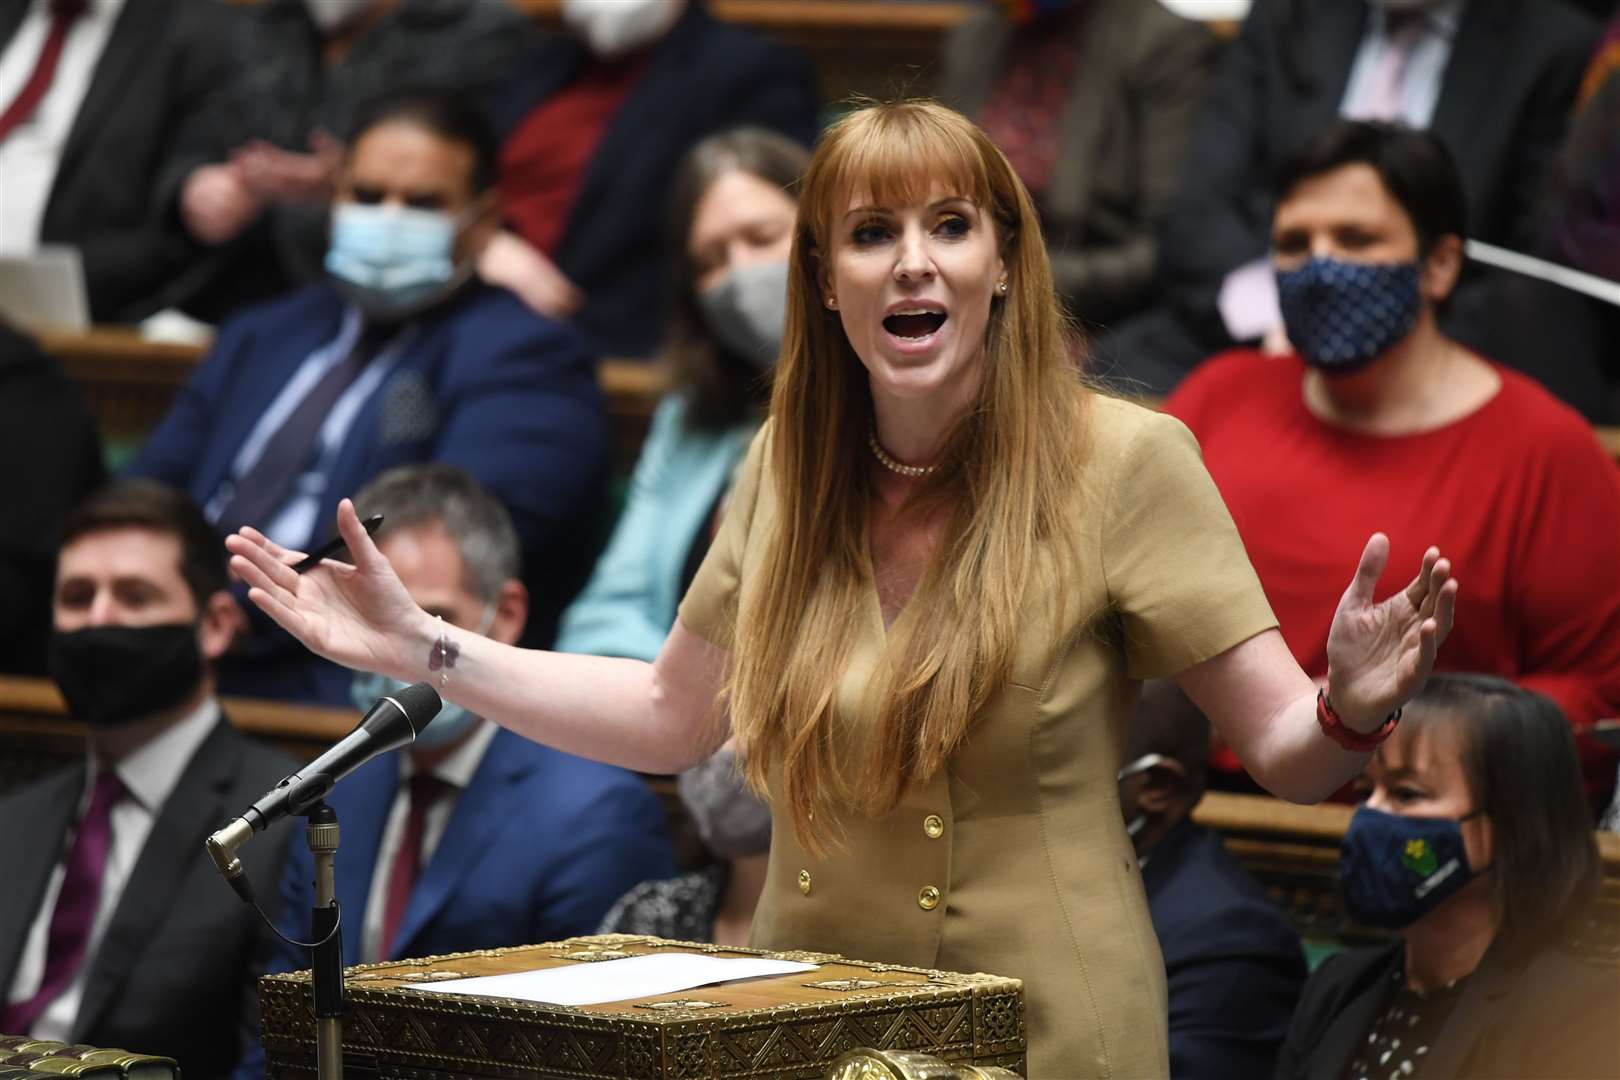 Deputy Labour leader Angela Rayner said police should investigate if an inquiry into No 10 rule-breaking finds wrongdoing (UK Parliament/Jessica Taylor/PA)